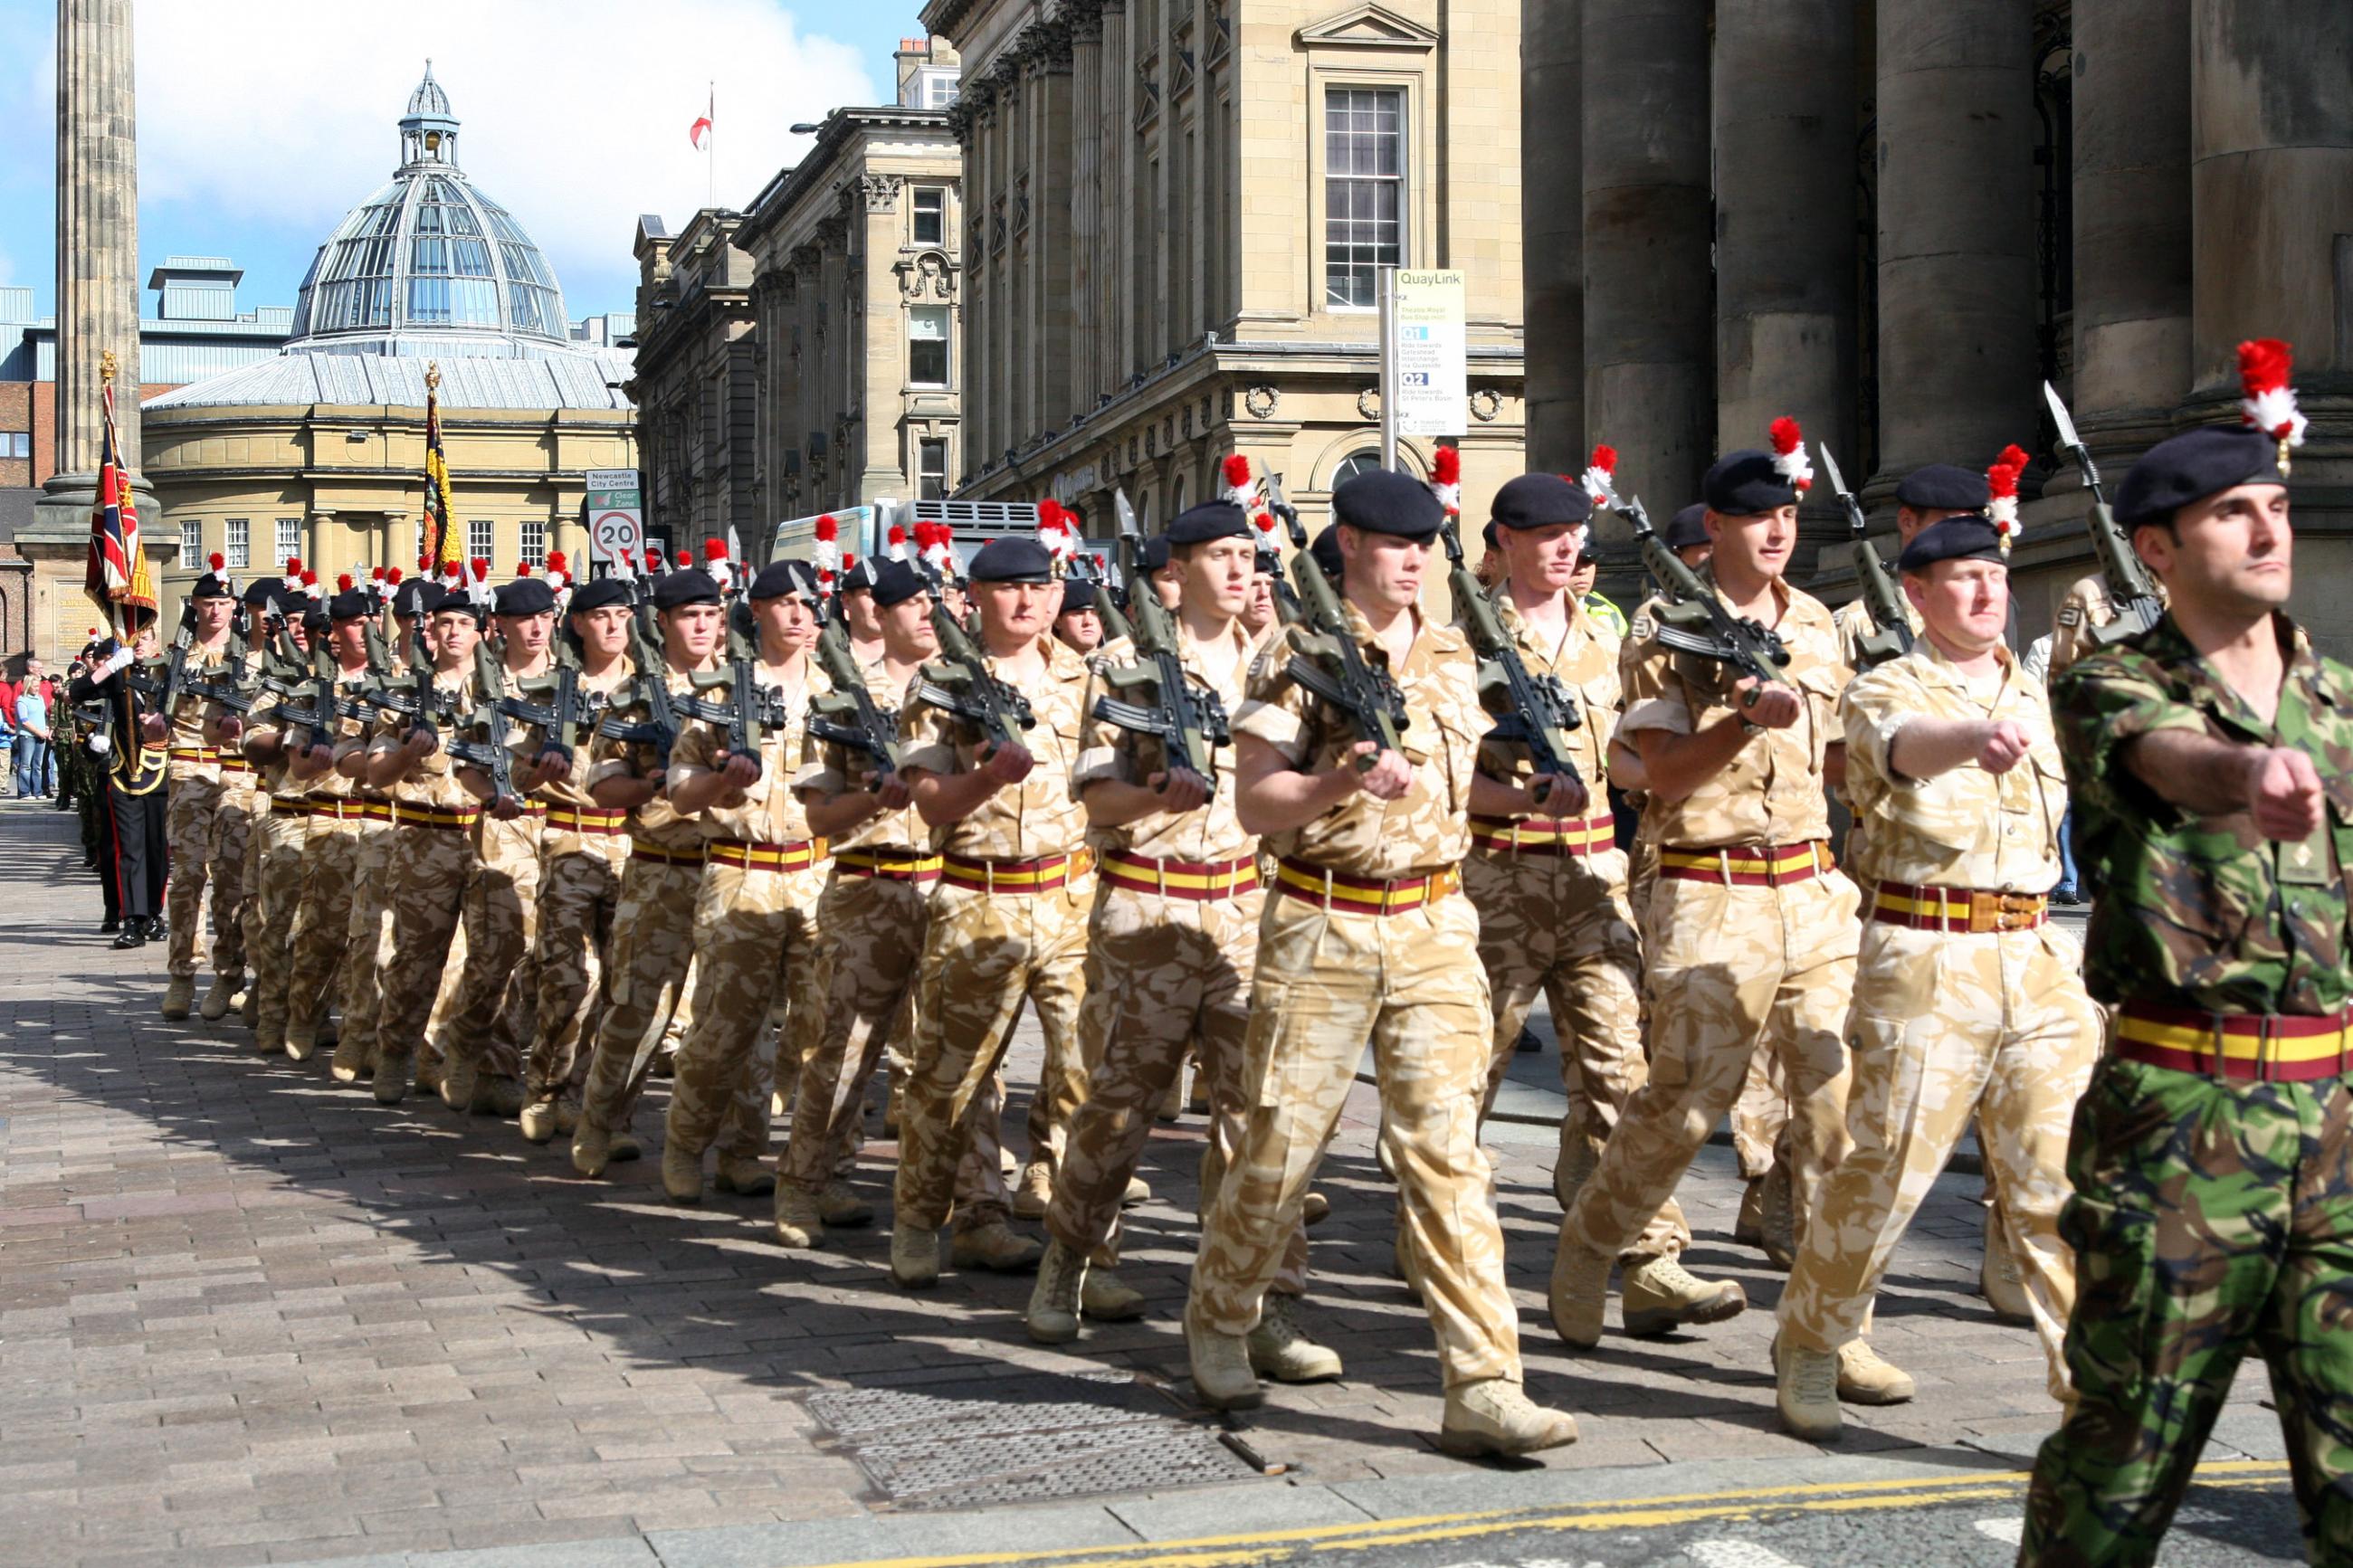 Royal Regiment of Fusiliers marching through Newcastle 